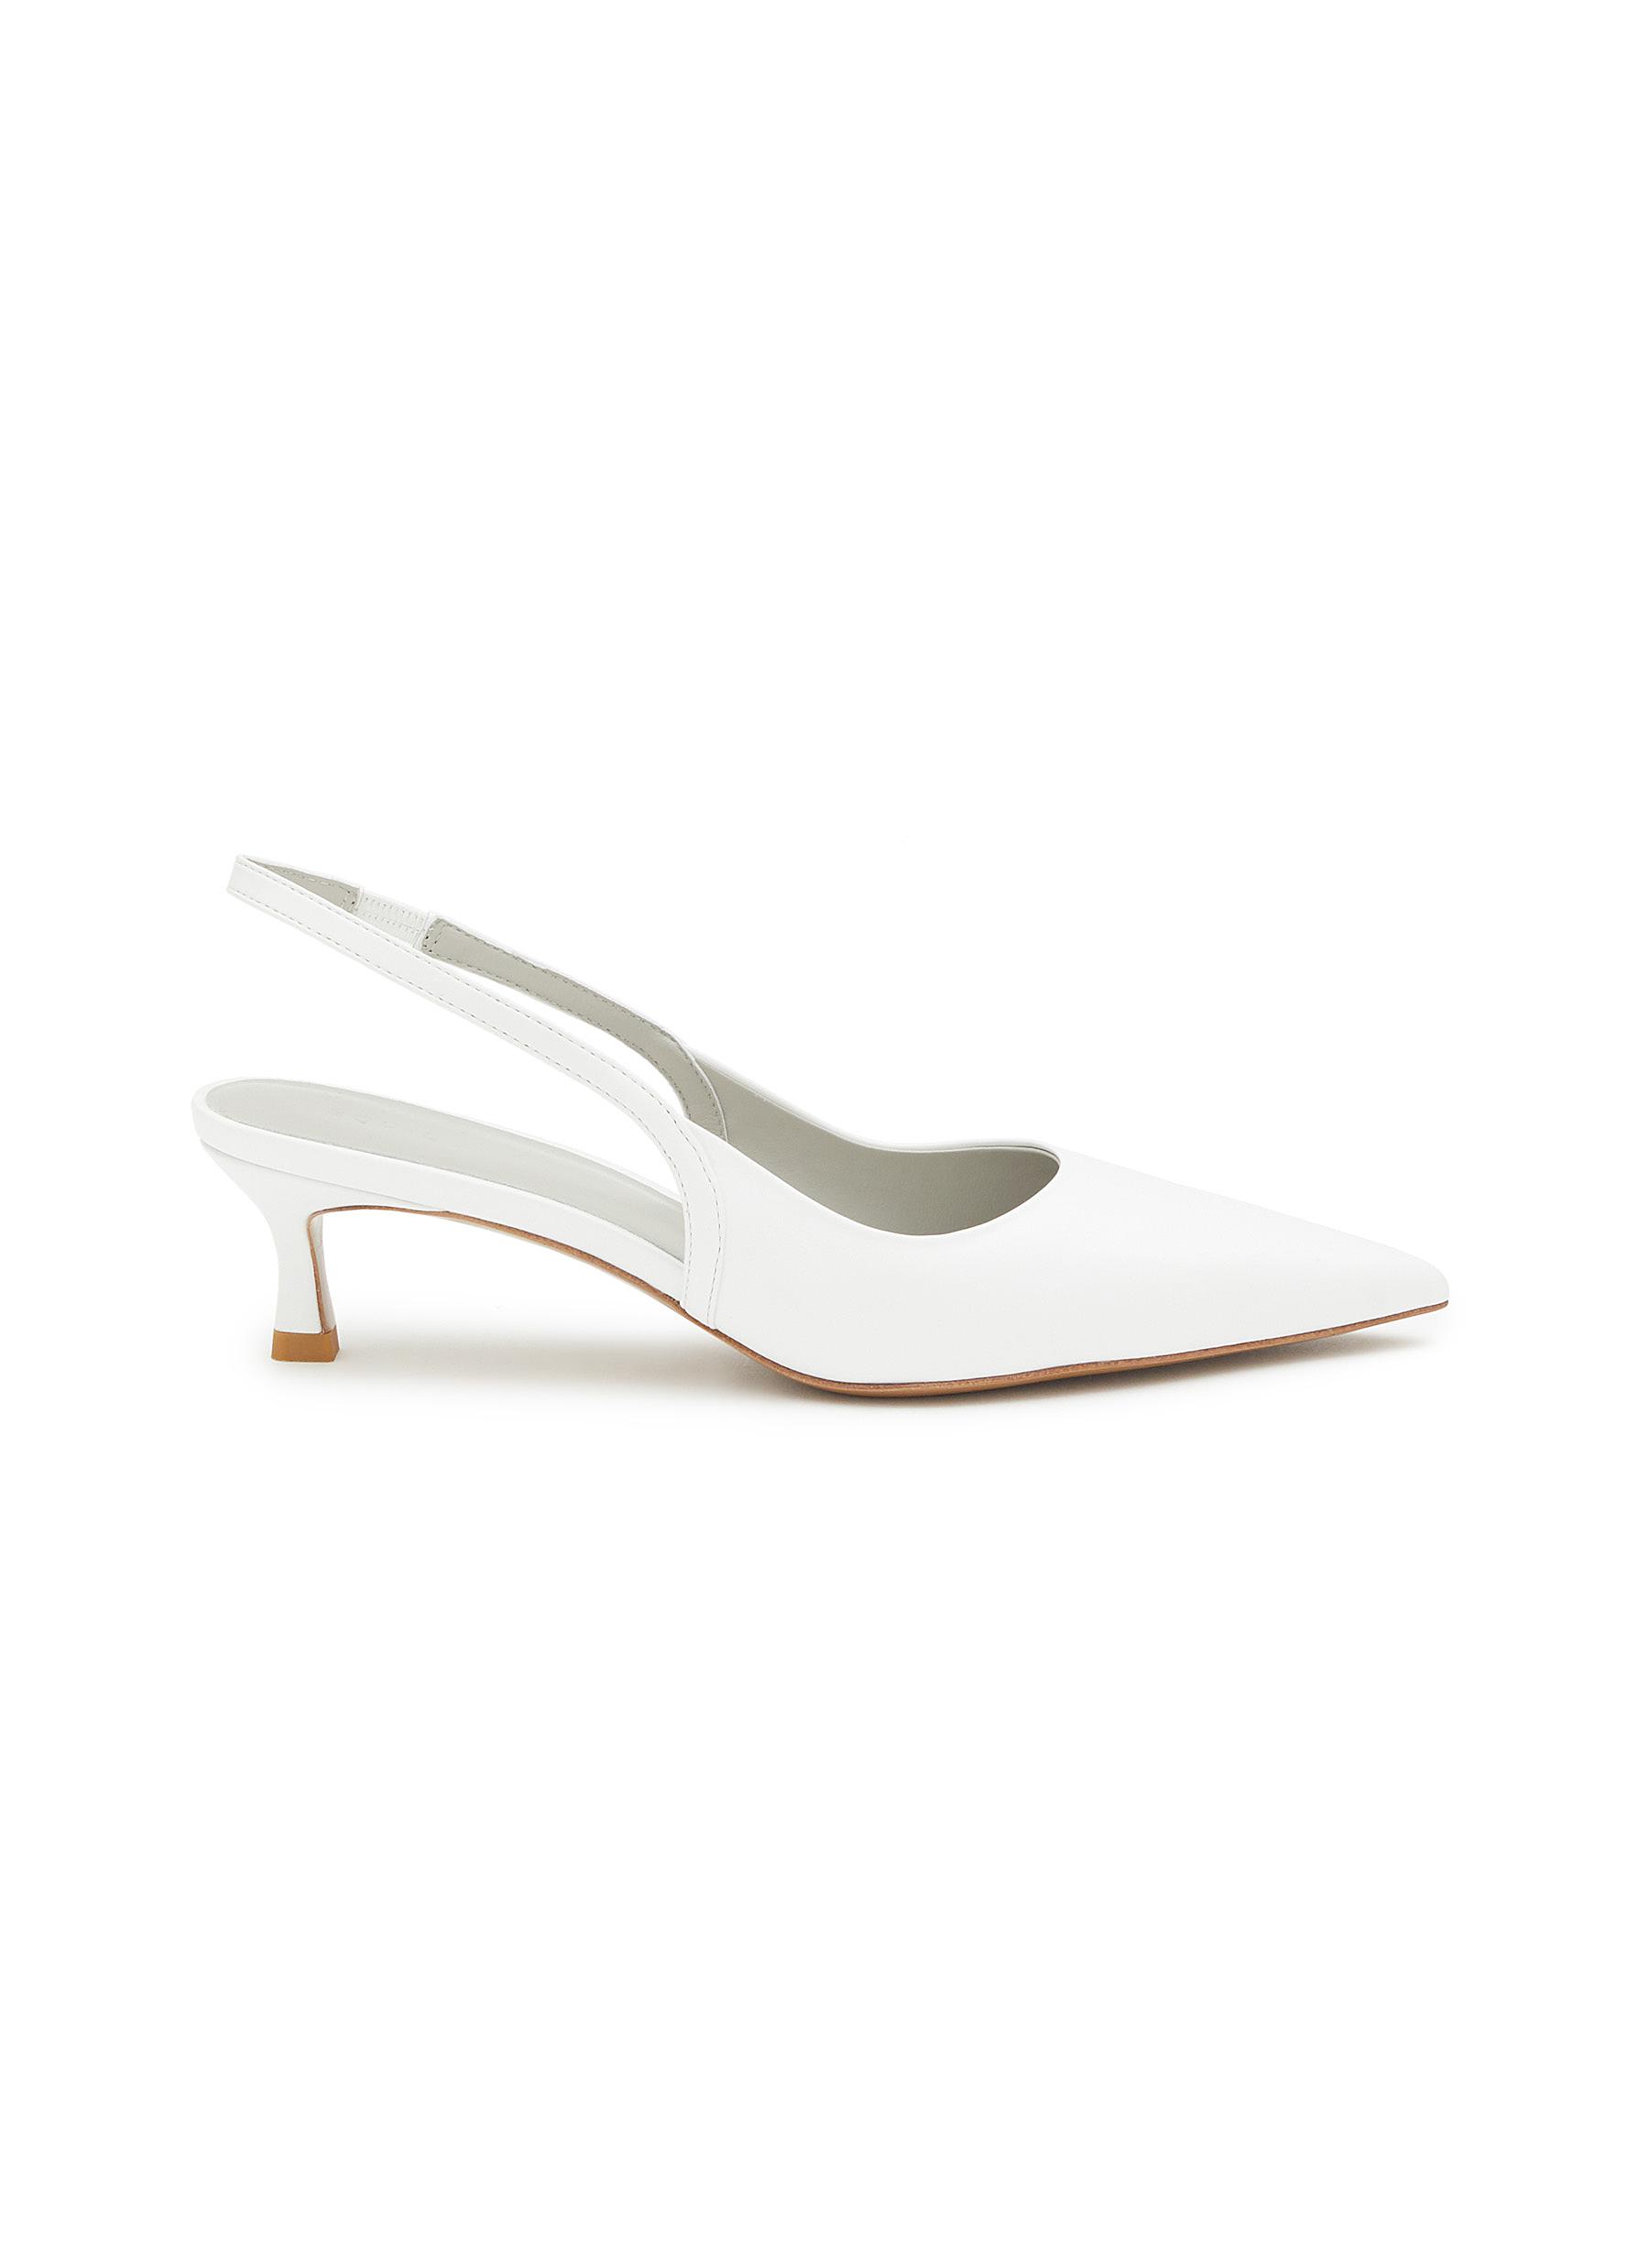 EQUIL ‘Lyon' 50 Leather Point Toe Slingback Pumps